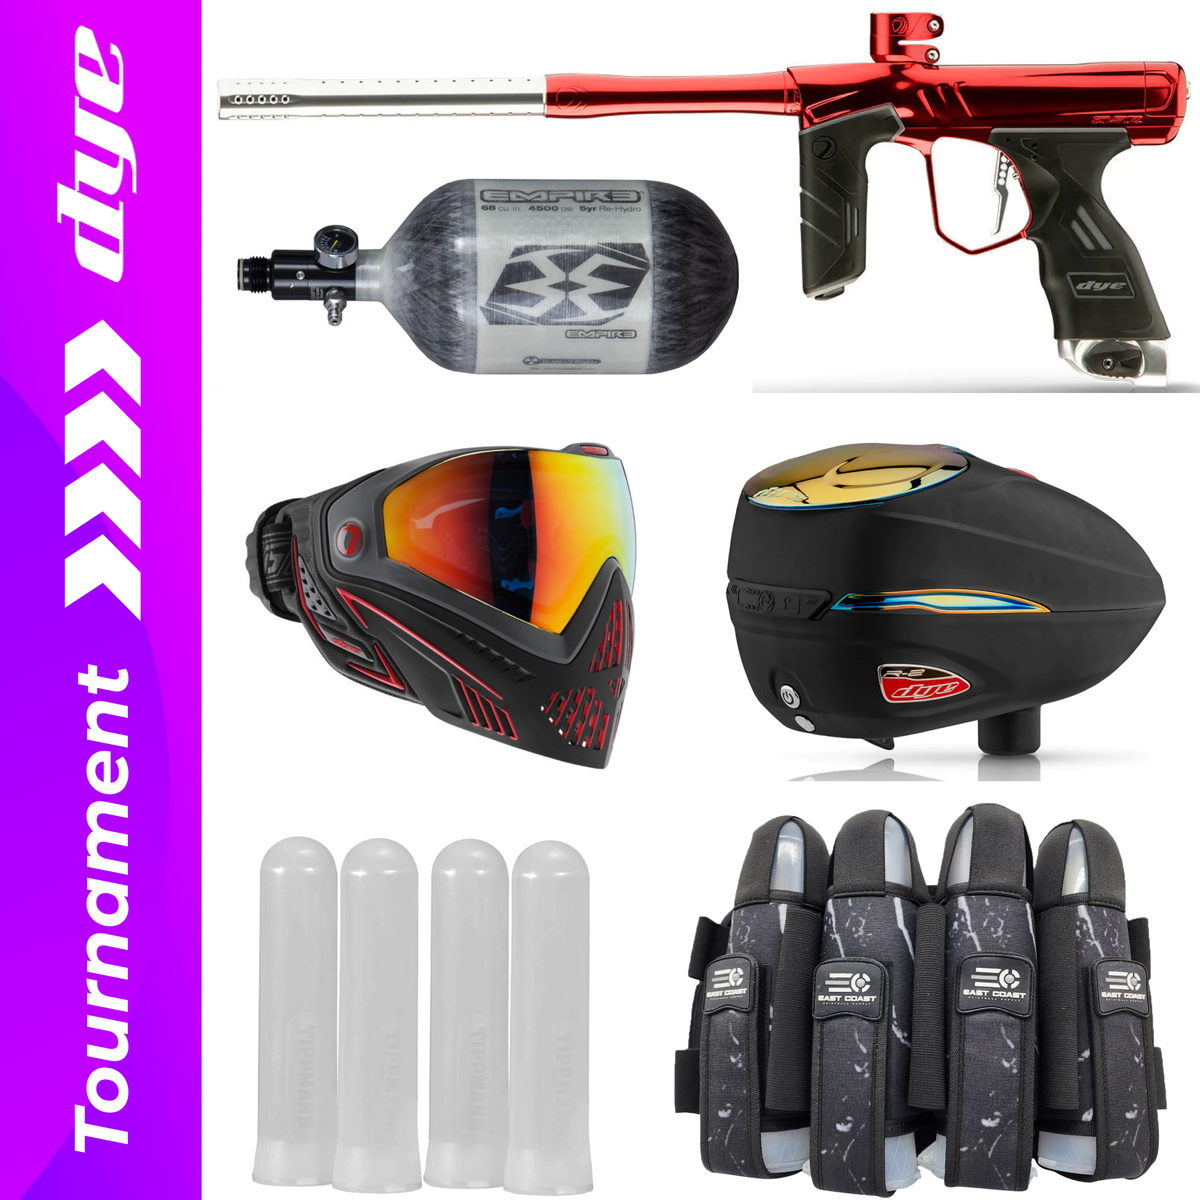 Dye DSR+ Paintball Tournament Package